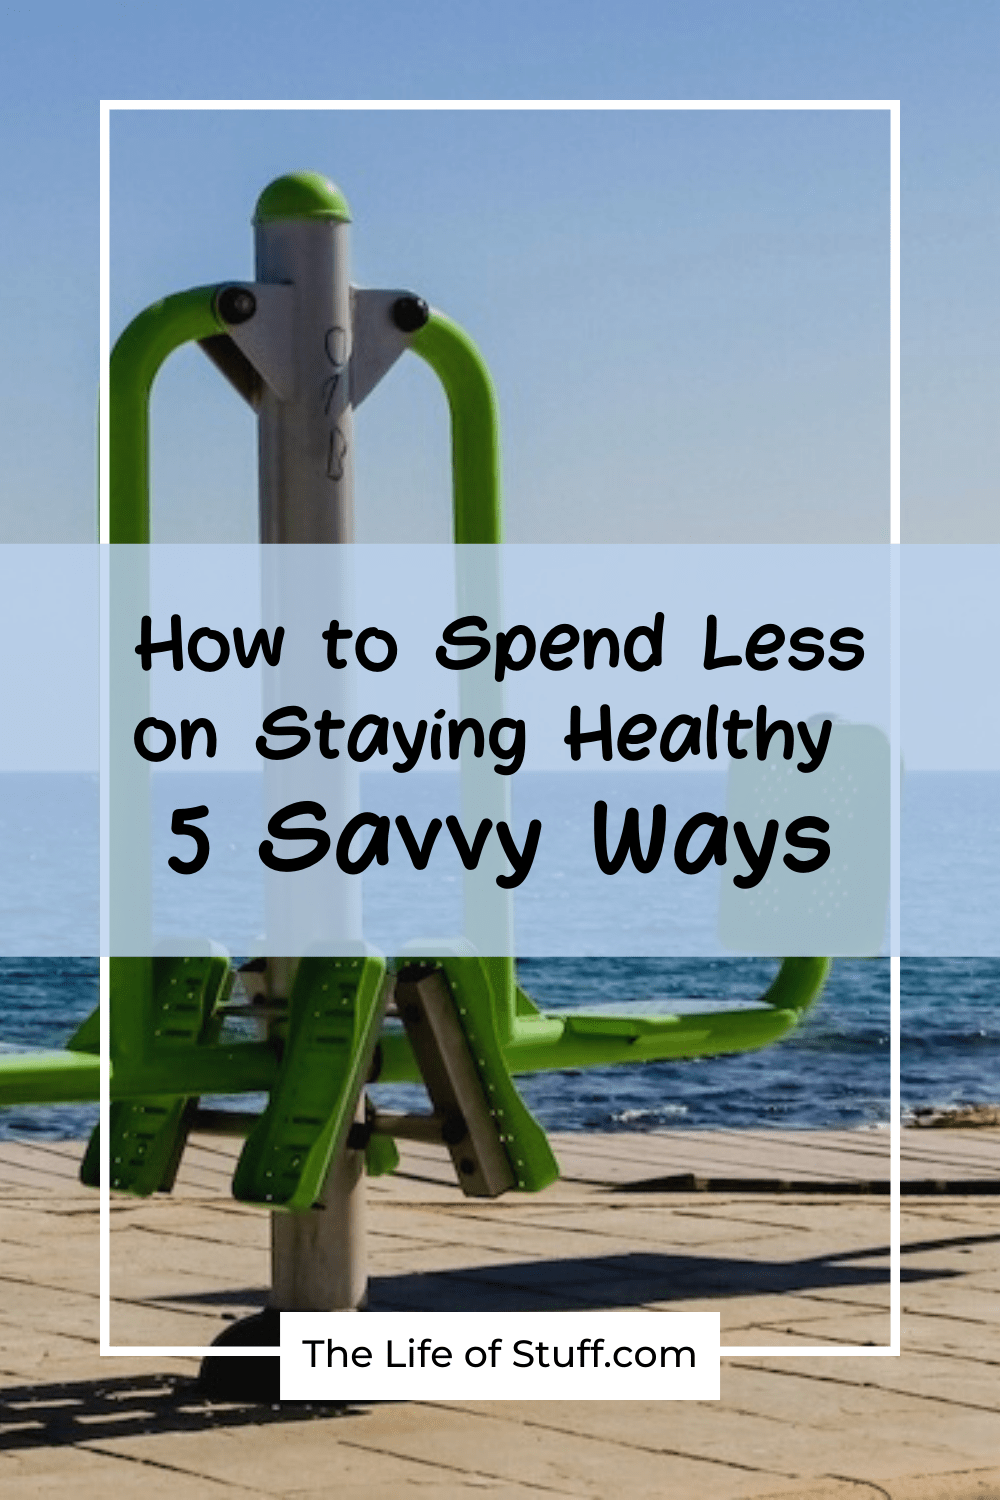 How to Spend Less on Staying Healthy - 5 Savvy Ways - The Life of Stuff